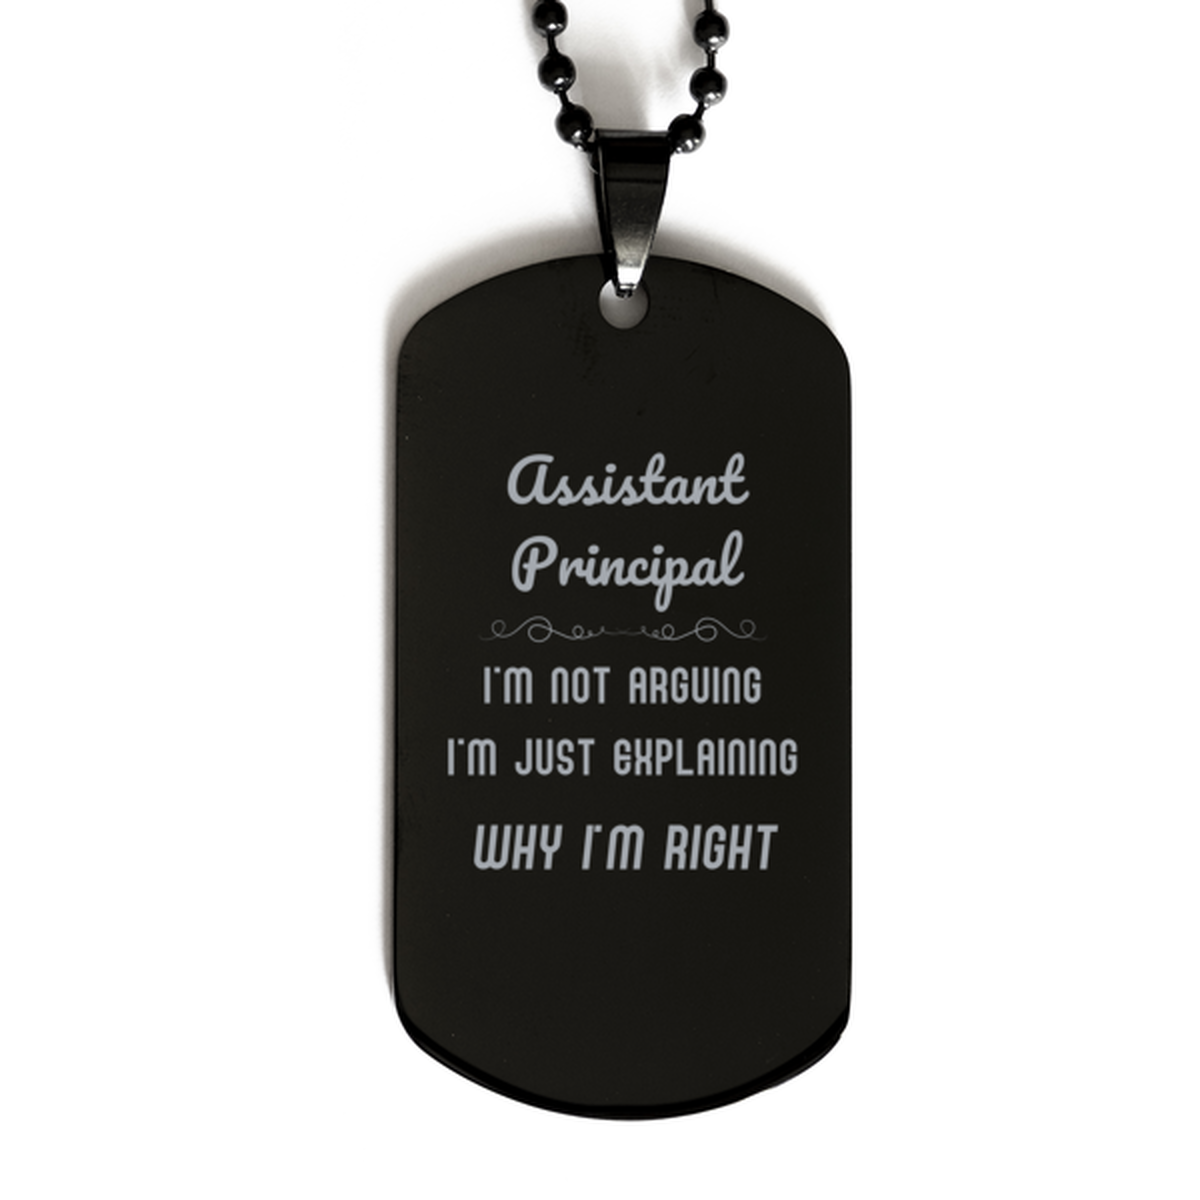 Assistant Principal I'm not Arguing. I'm Just Explaining Why I'm RIGHT Black Dog Tag, Funny Saying Quote Assistant Principal Gifts For Assistant Principal Graduation Birthday Christmas Gifts for Men Women Coworker